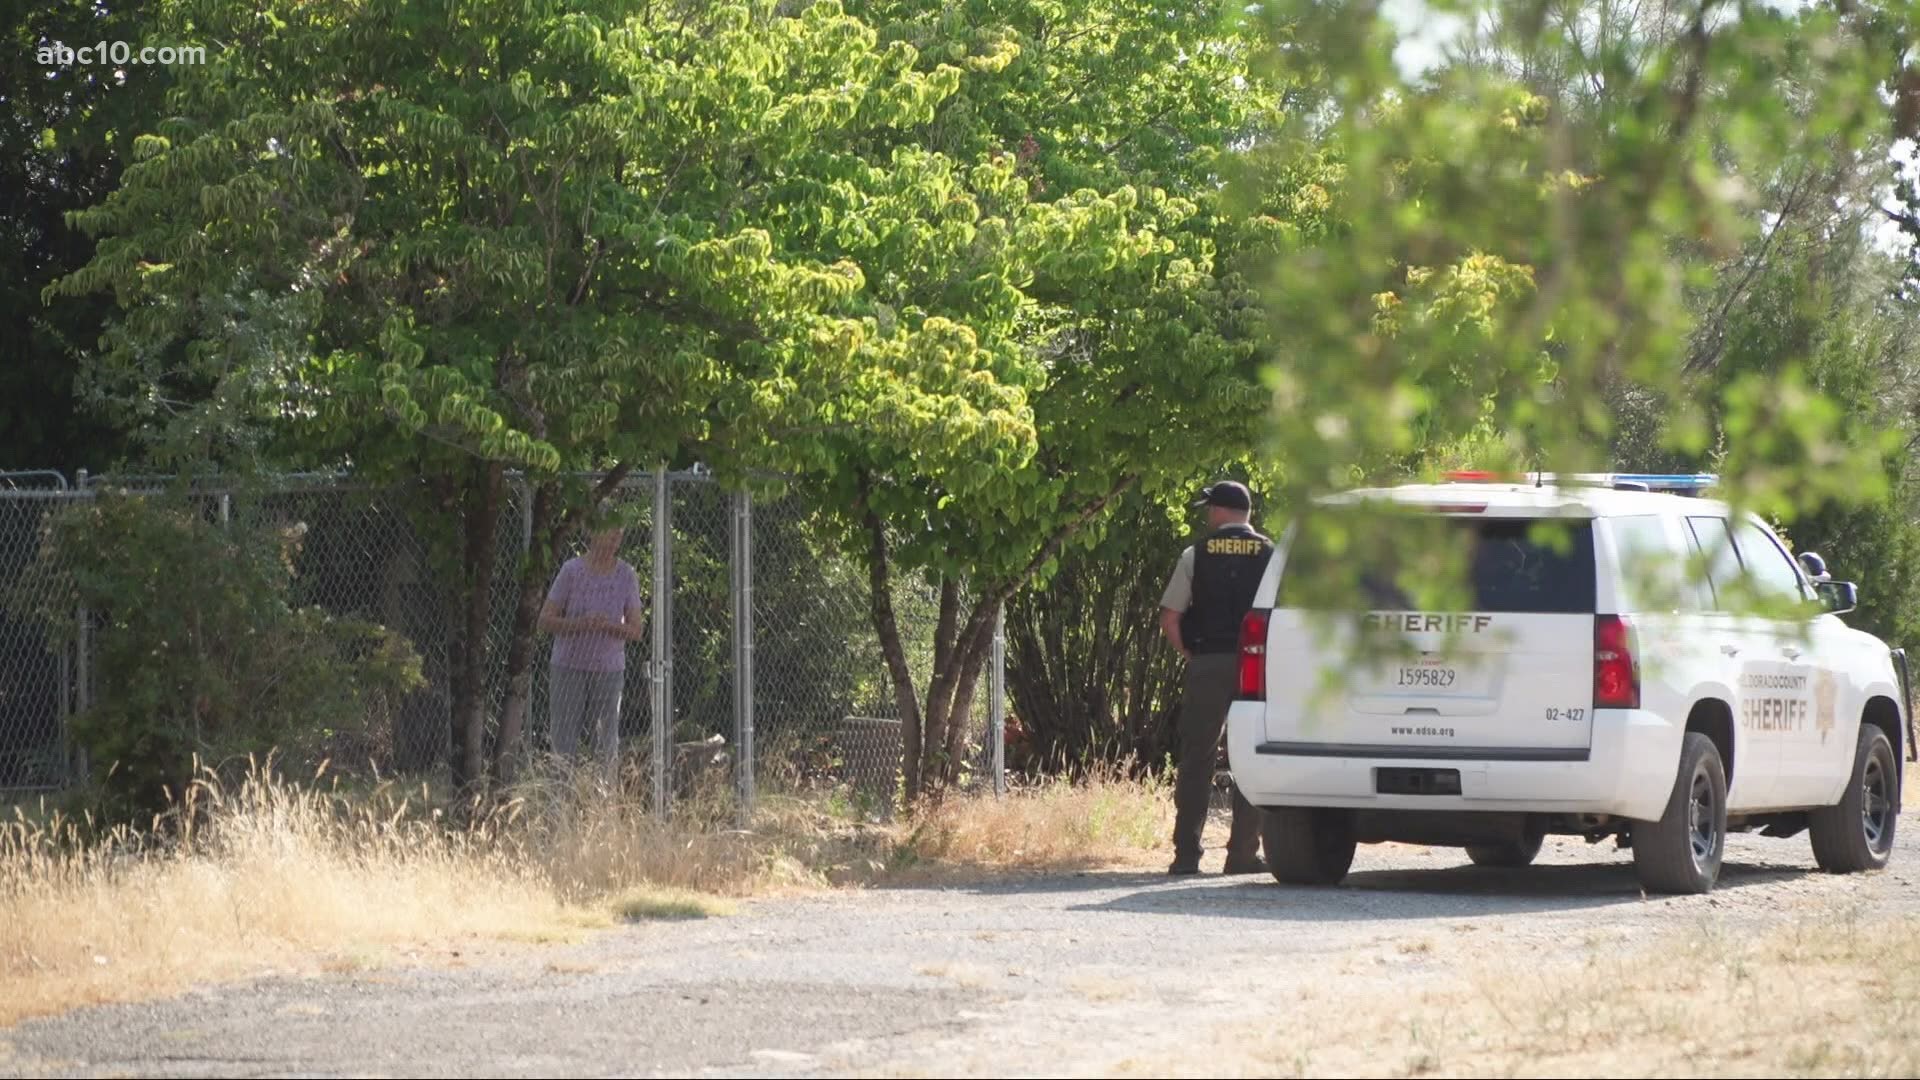 The man's body was found on the side of the road a block away from where Jeanie Cilley, 63, was found on Friday, July 9, investigators said.